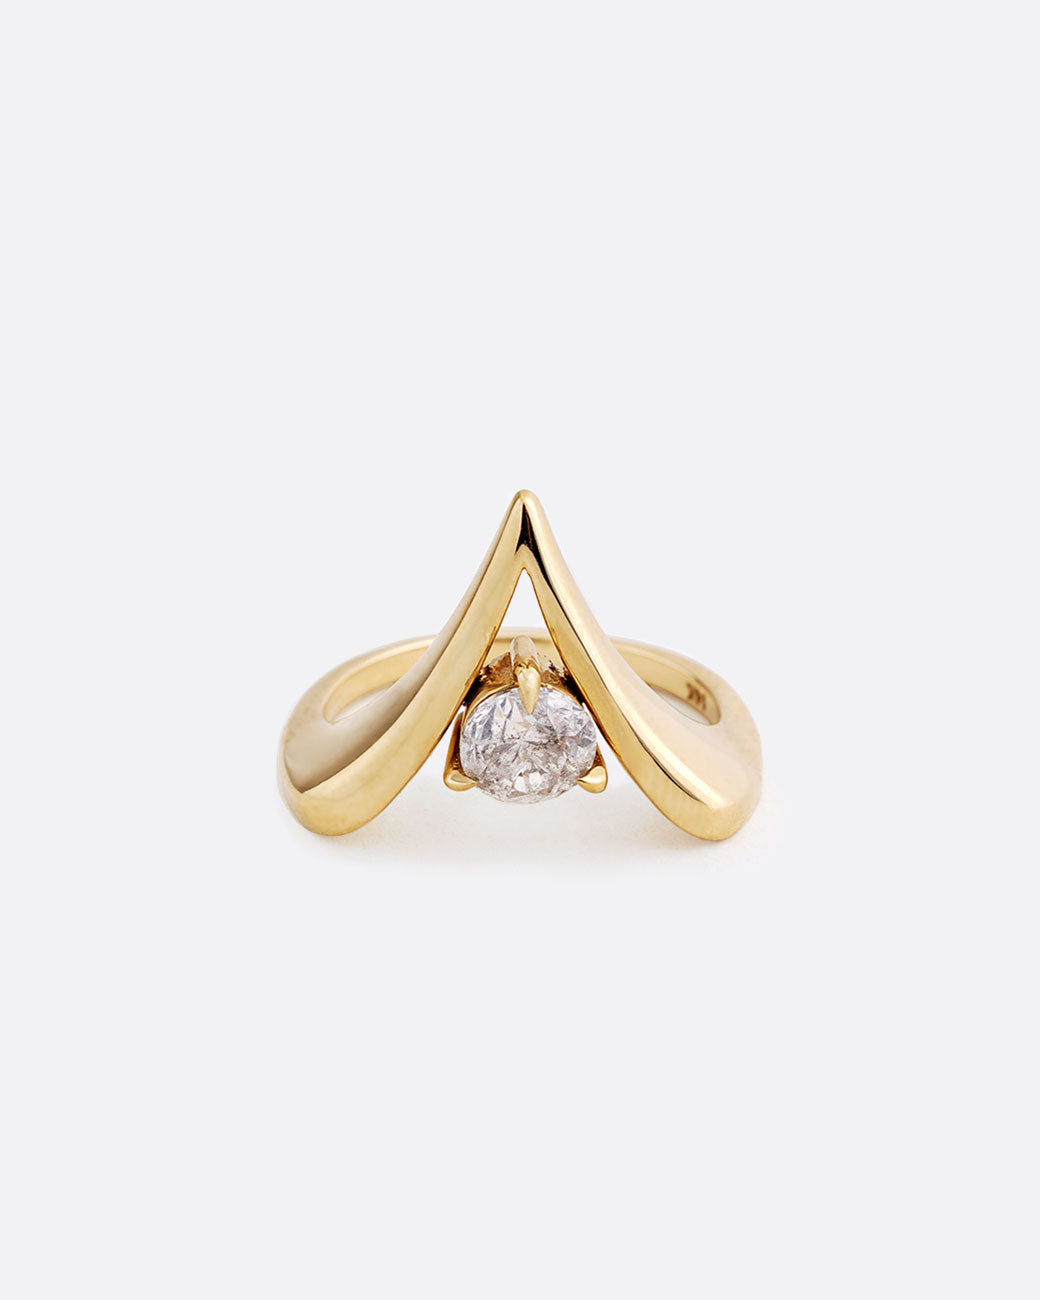 14k yellow gold V shaped ring with round diamond by Maggi Simpkins.